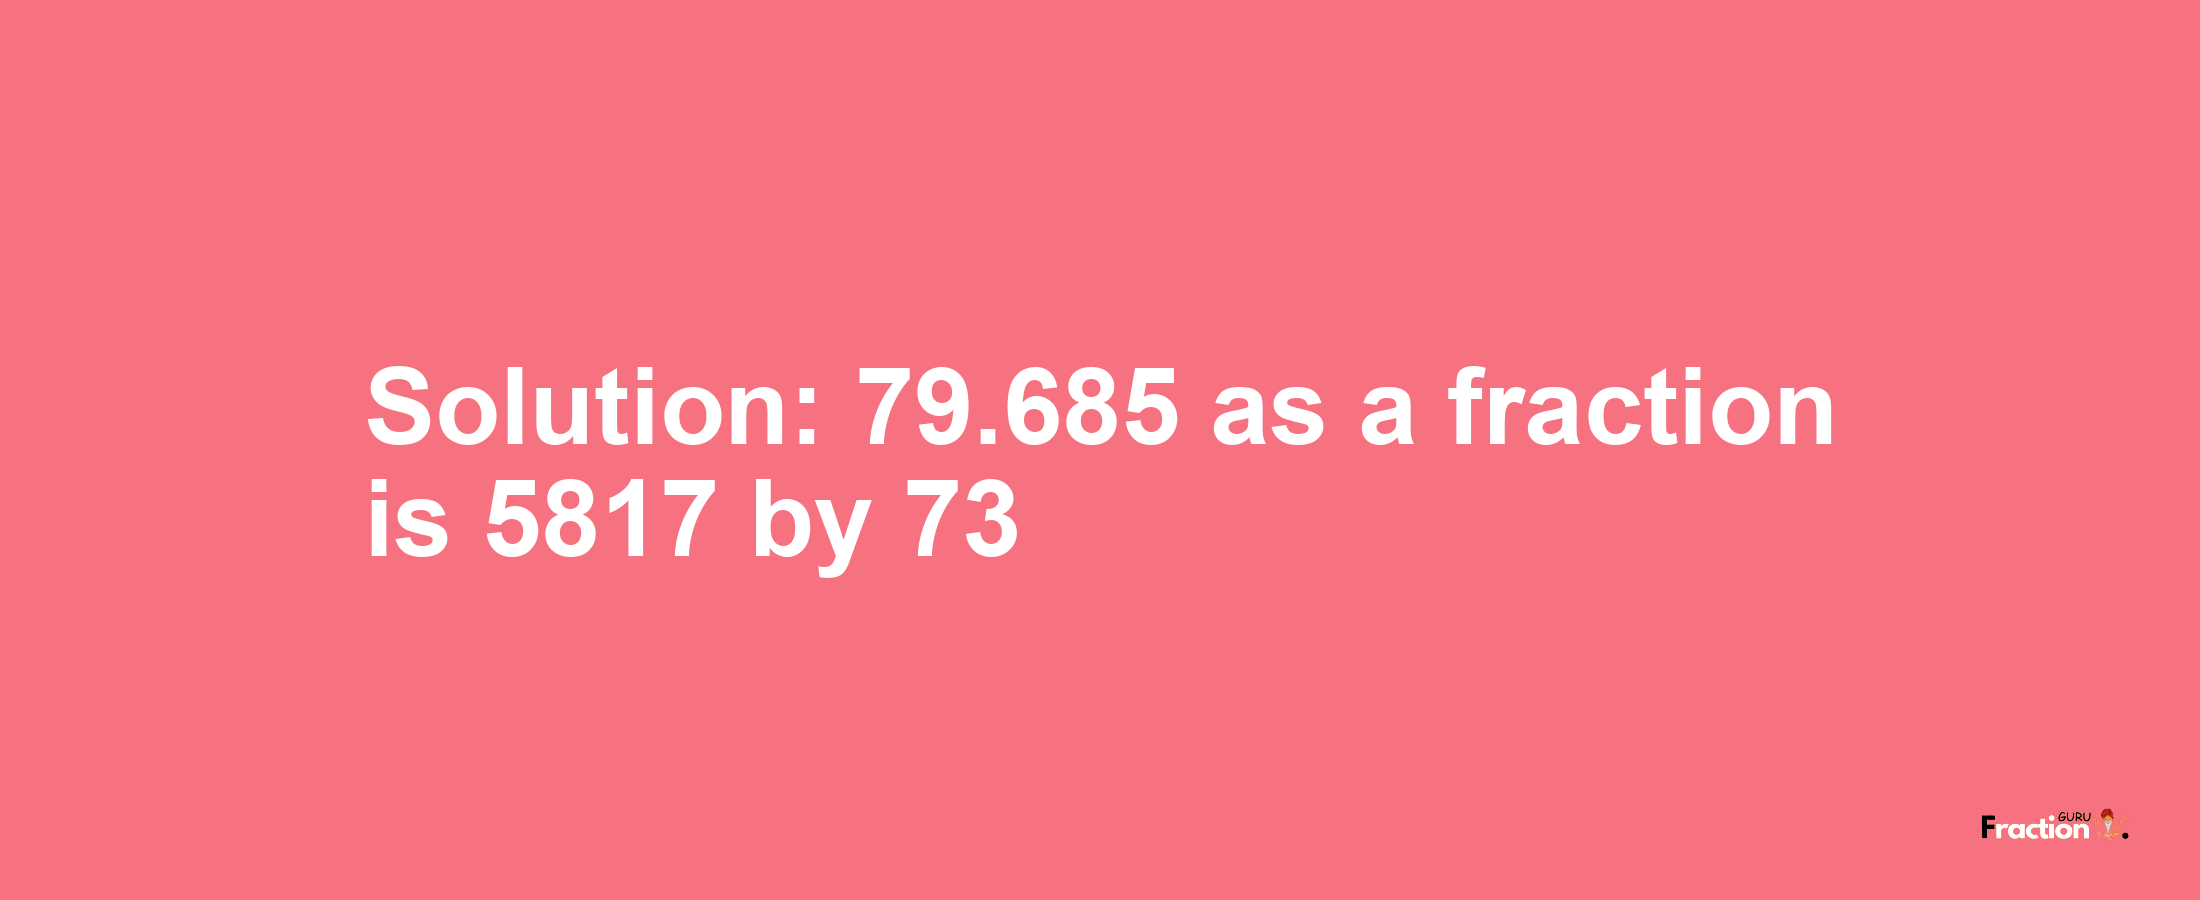 Solution:79.685 as a fraction is 5817/73